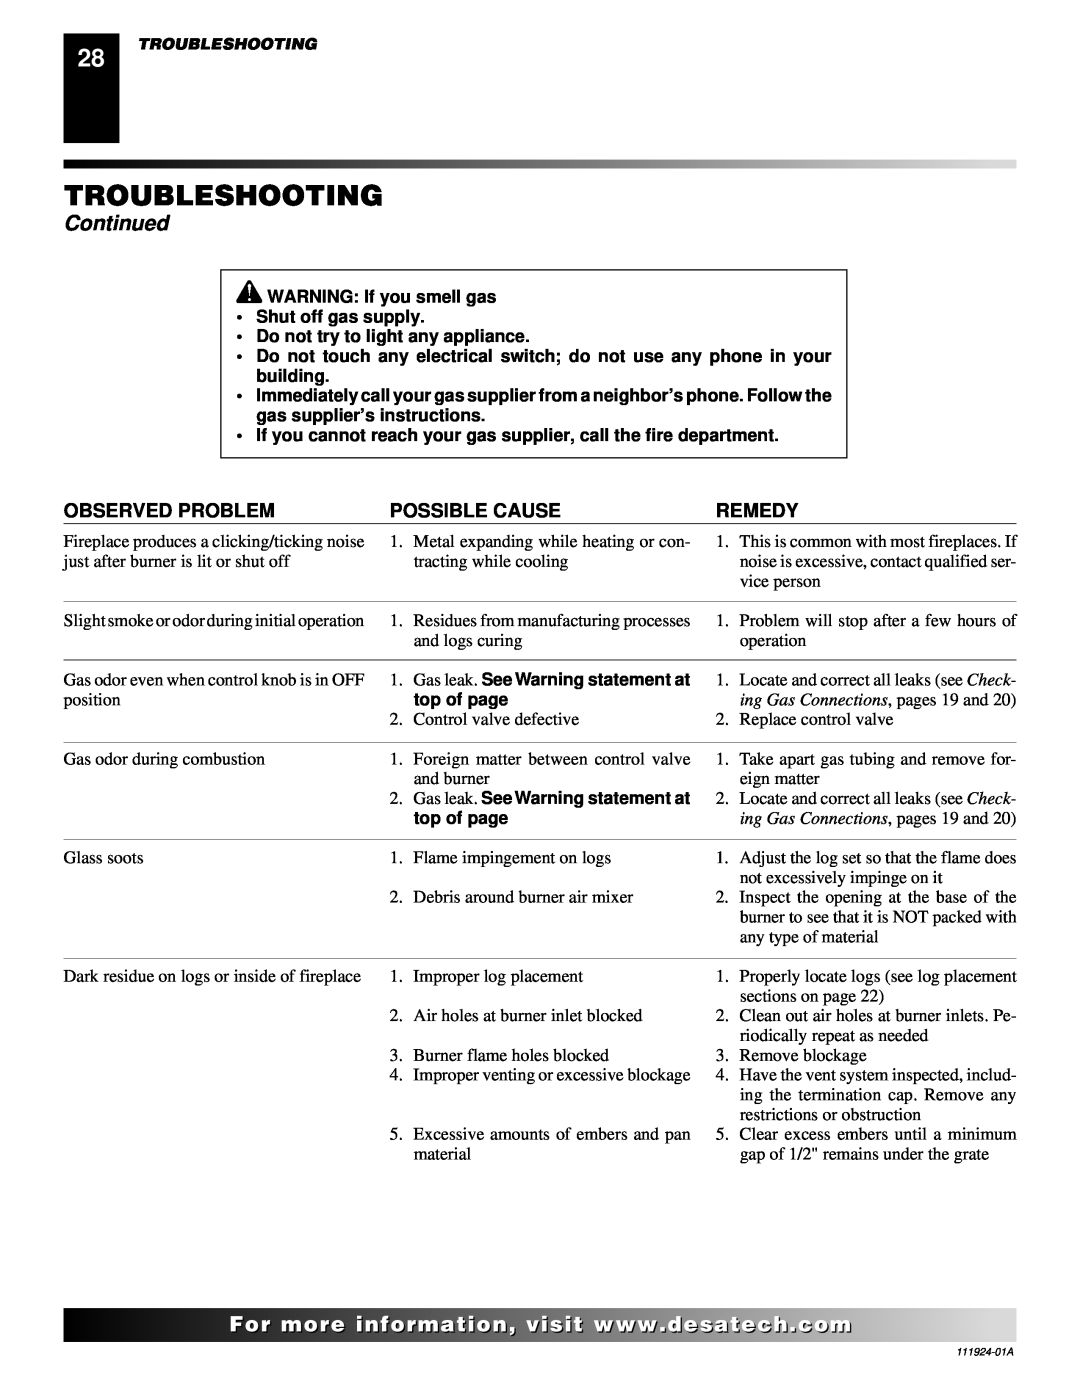 Desa K36EP, K36EN Troubleshooting, Continued, Observed Problem, Possible Cause, Remedy, ing Gas Connections, pages 19 and 